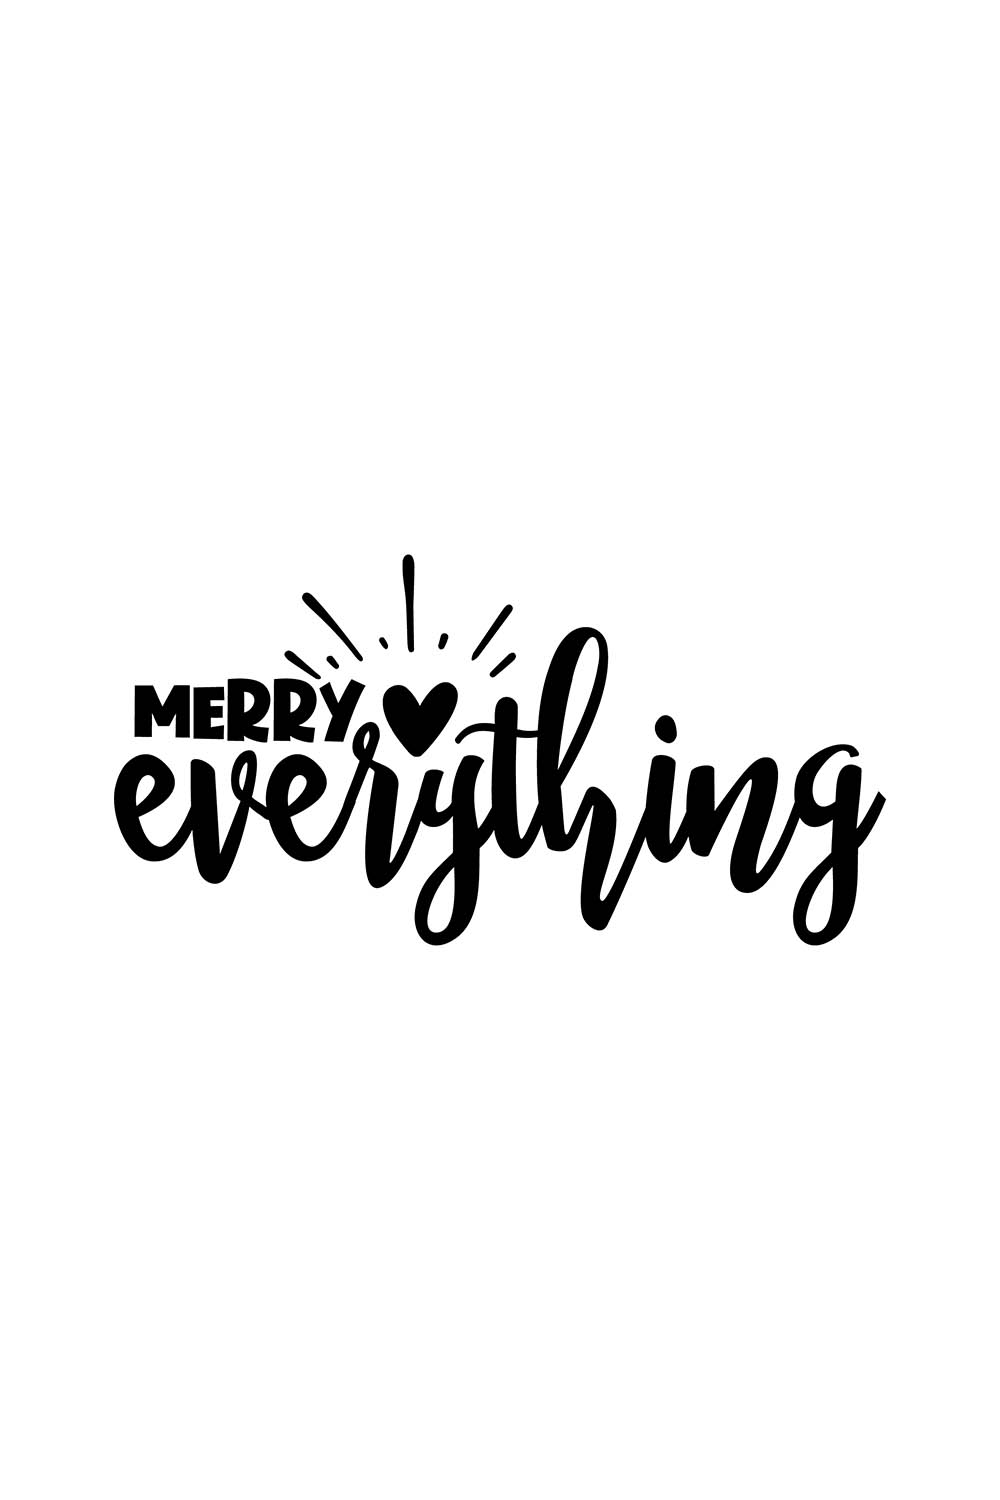 Image with wonderful black lettering for Merry Everything prints.